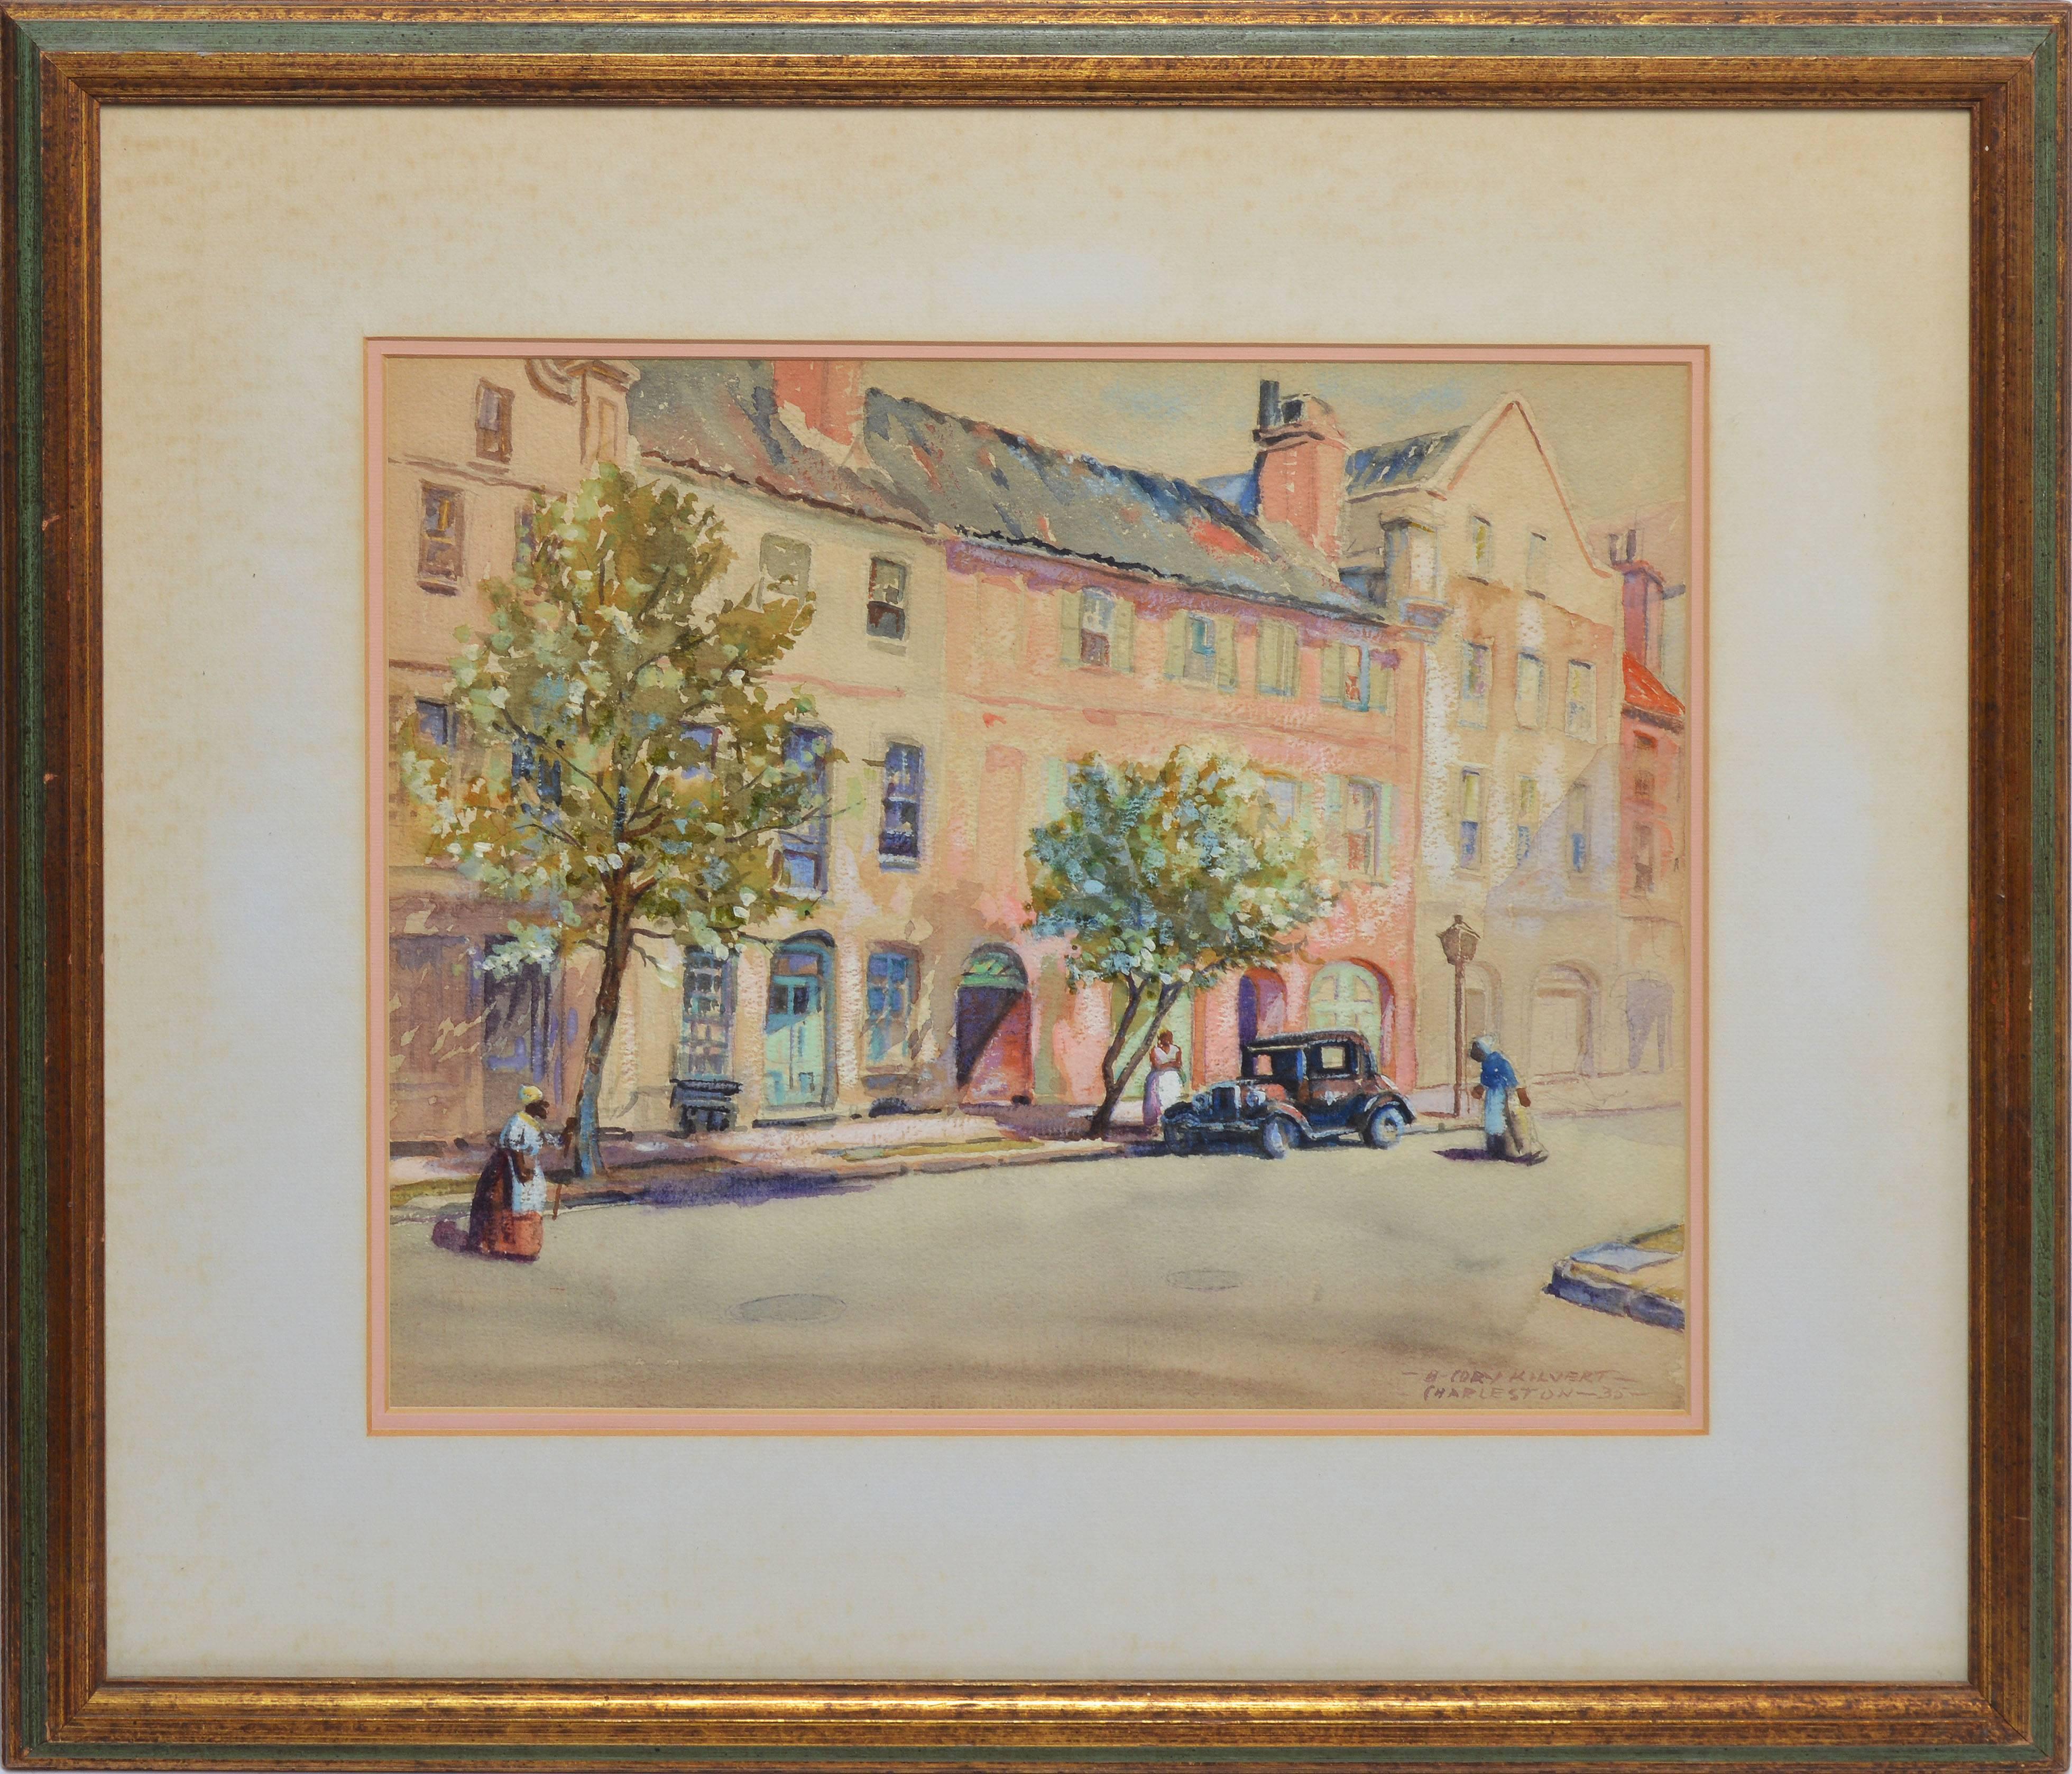 Impressionist view of a Charleston, South Carolina street by Benjamin Sayre Cory Kilvert (1879 - 1946).  Watercolor on paper, circa 1910.  Signed lower right.  Displayed in a giltwood frame.  Image size, 13.5"L x 12"H, overall 22"L x 20"H.